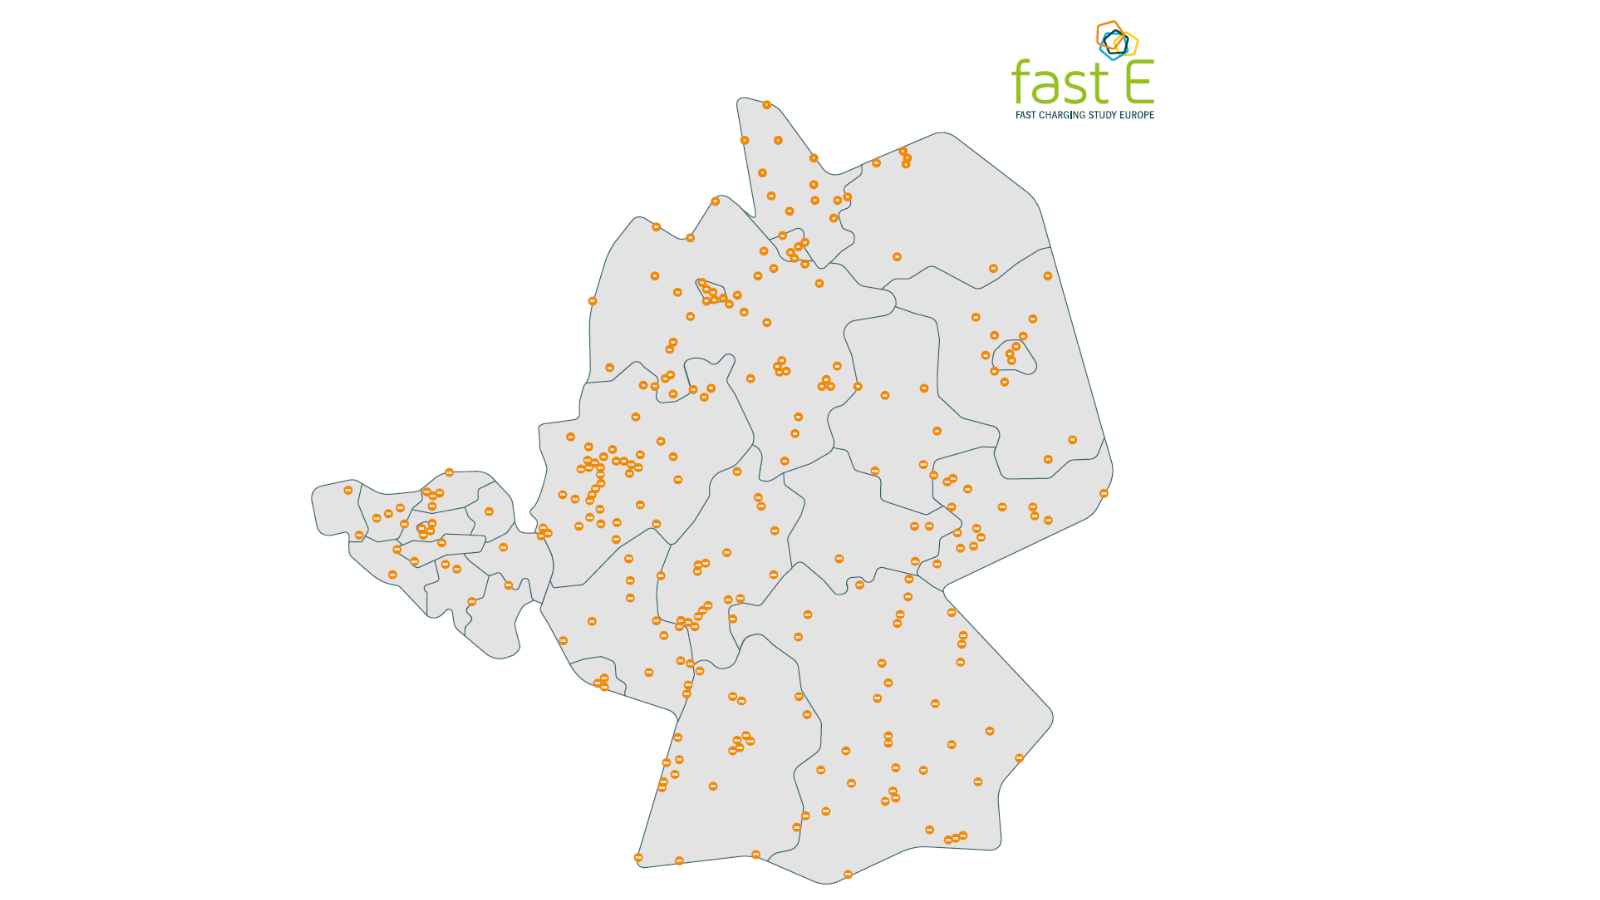 Fast-E locations Germany Allego